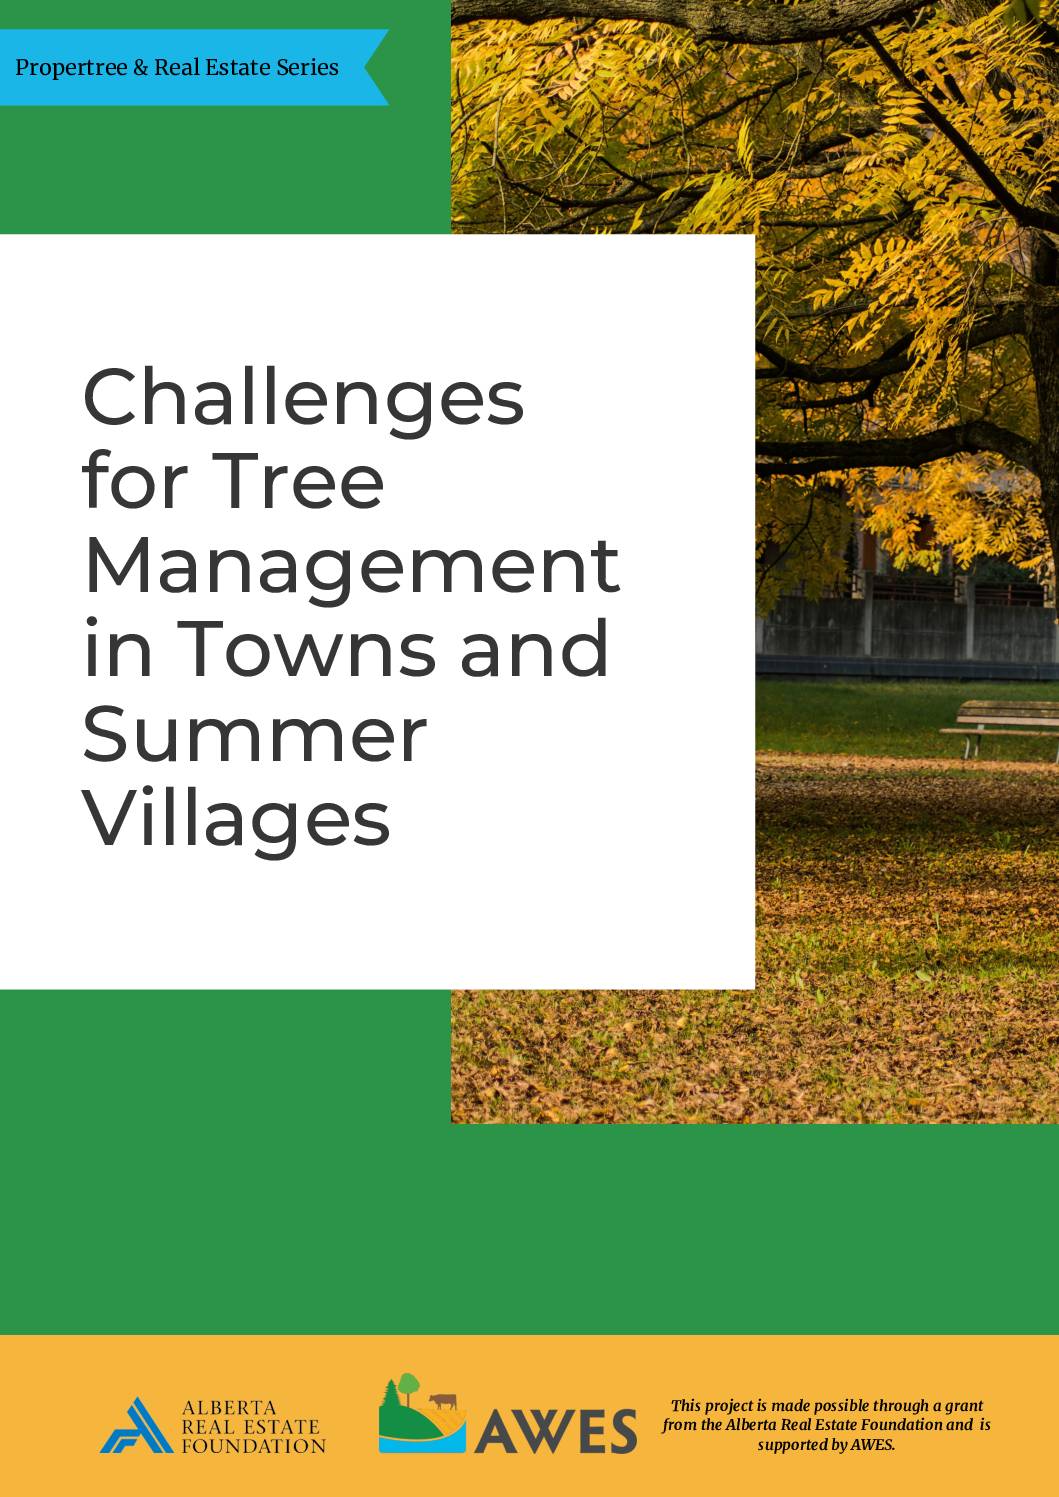 Challenges for Tree Management in Towns and Summer Villages